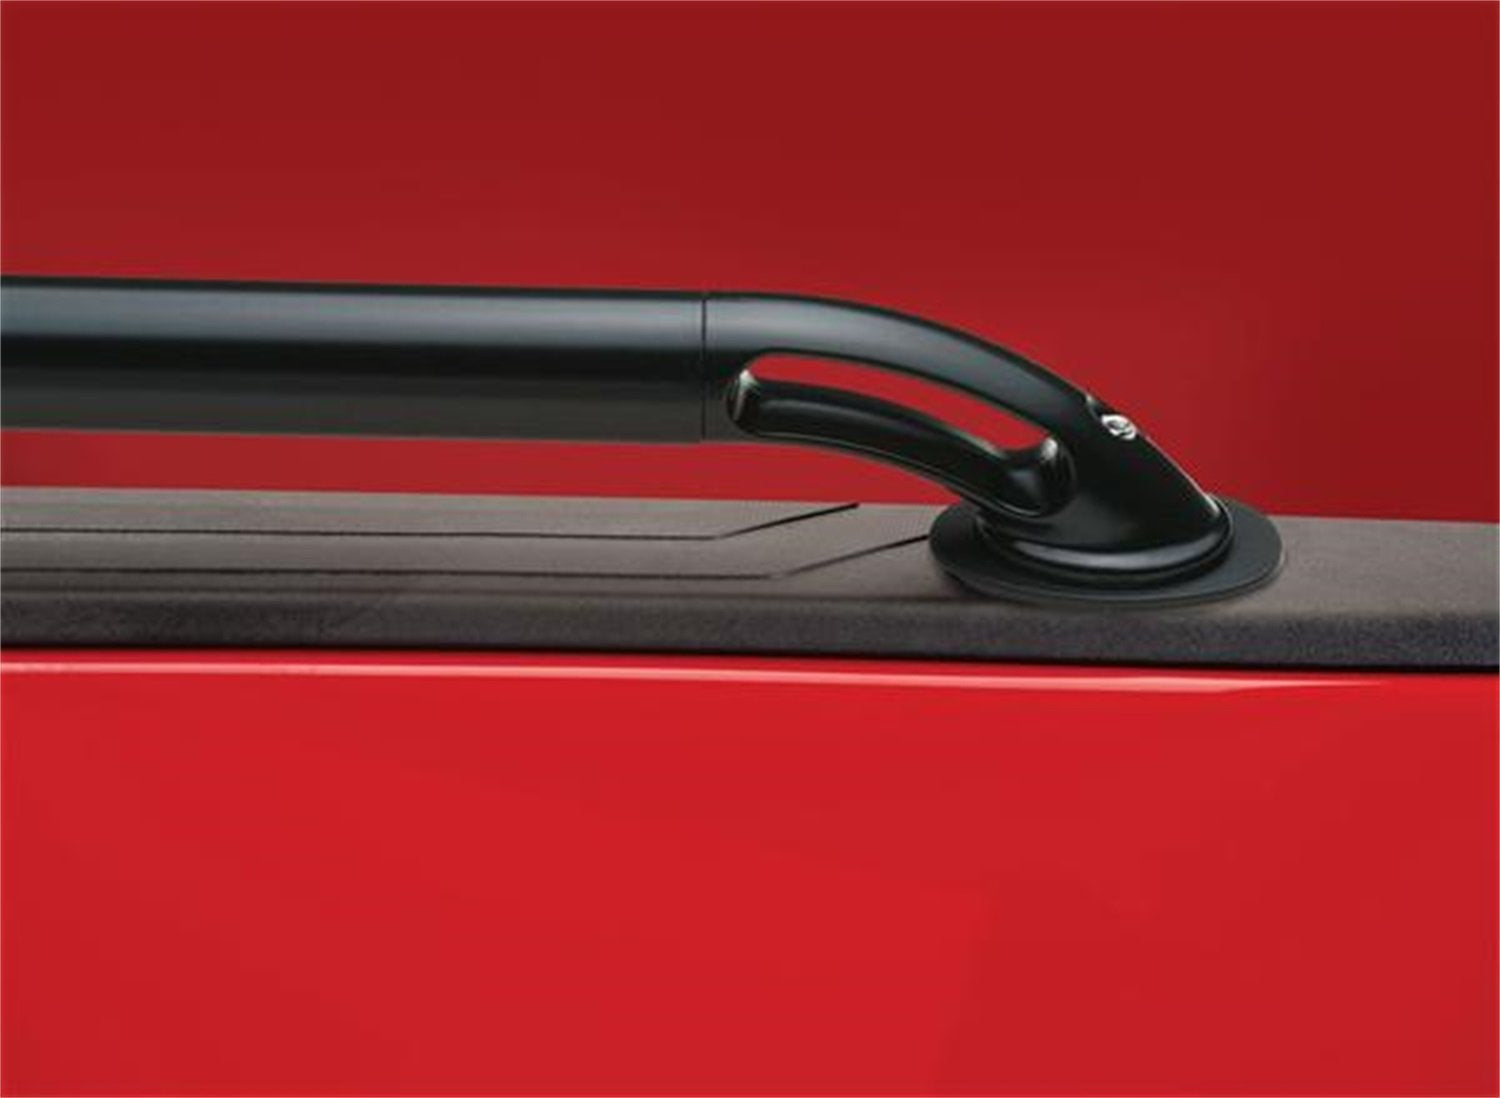 Putco 88896 Bed Rails, Approx. 6 ft. 5 in. Powdercoated Black